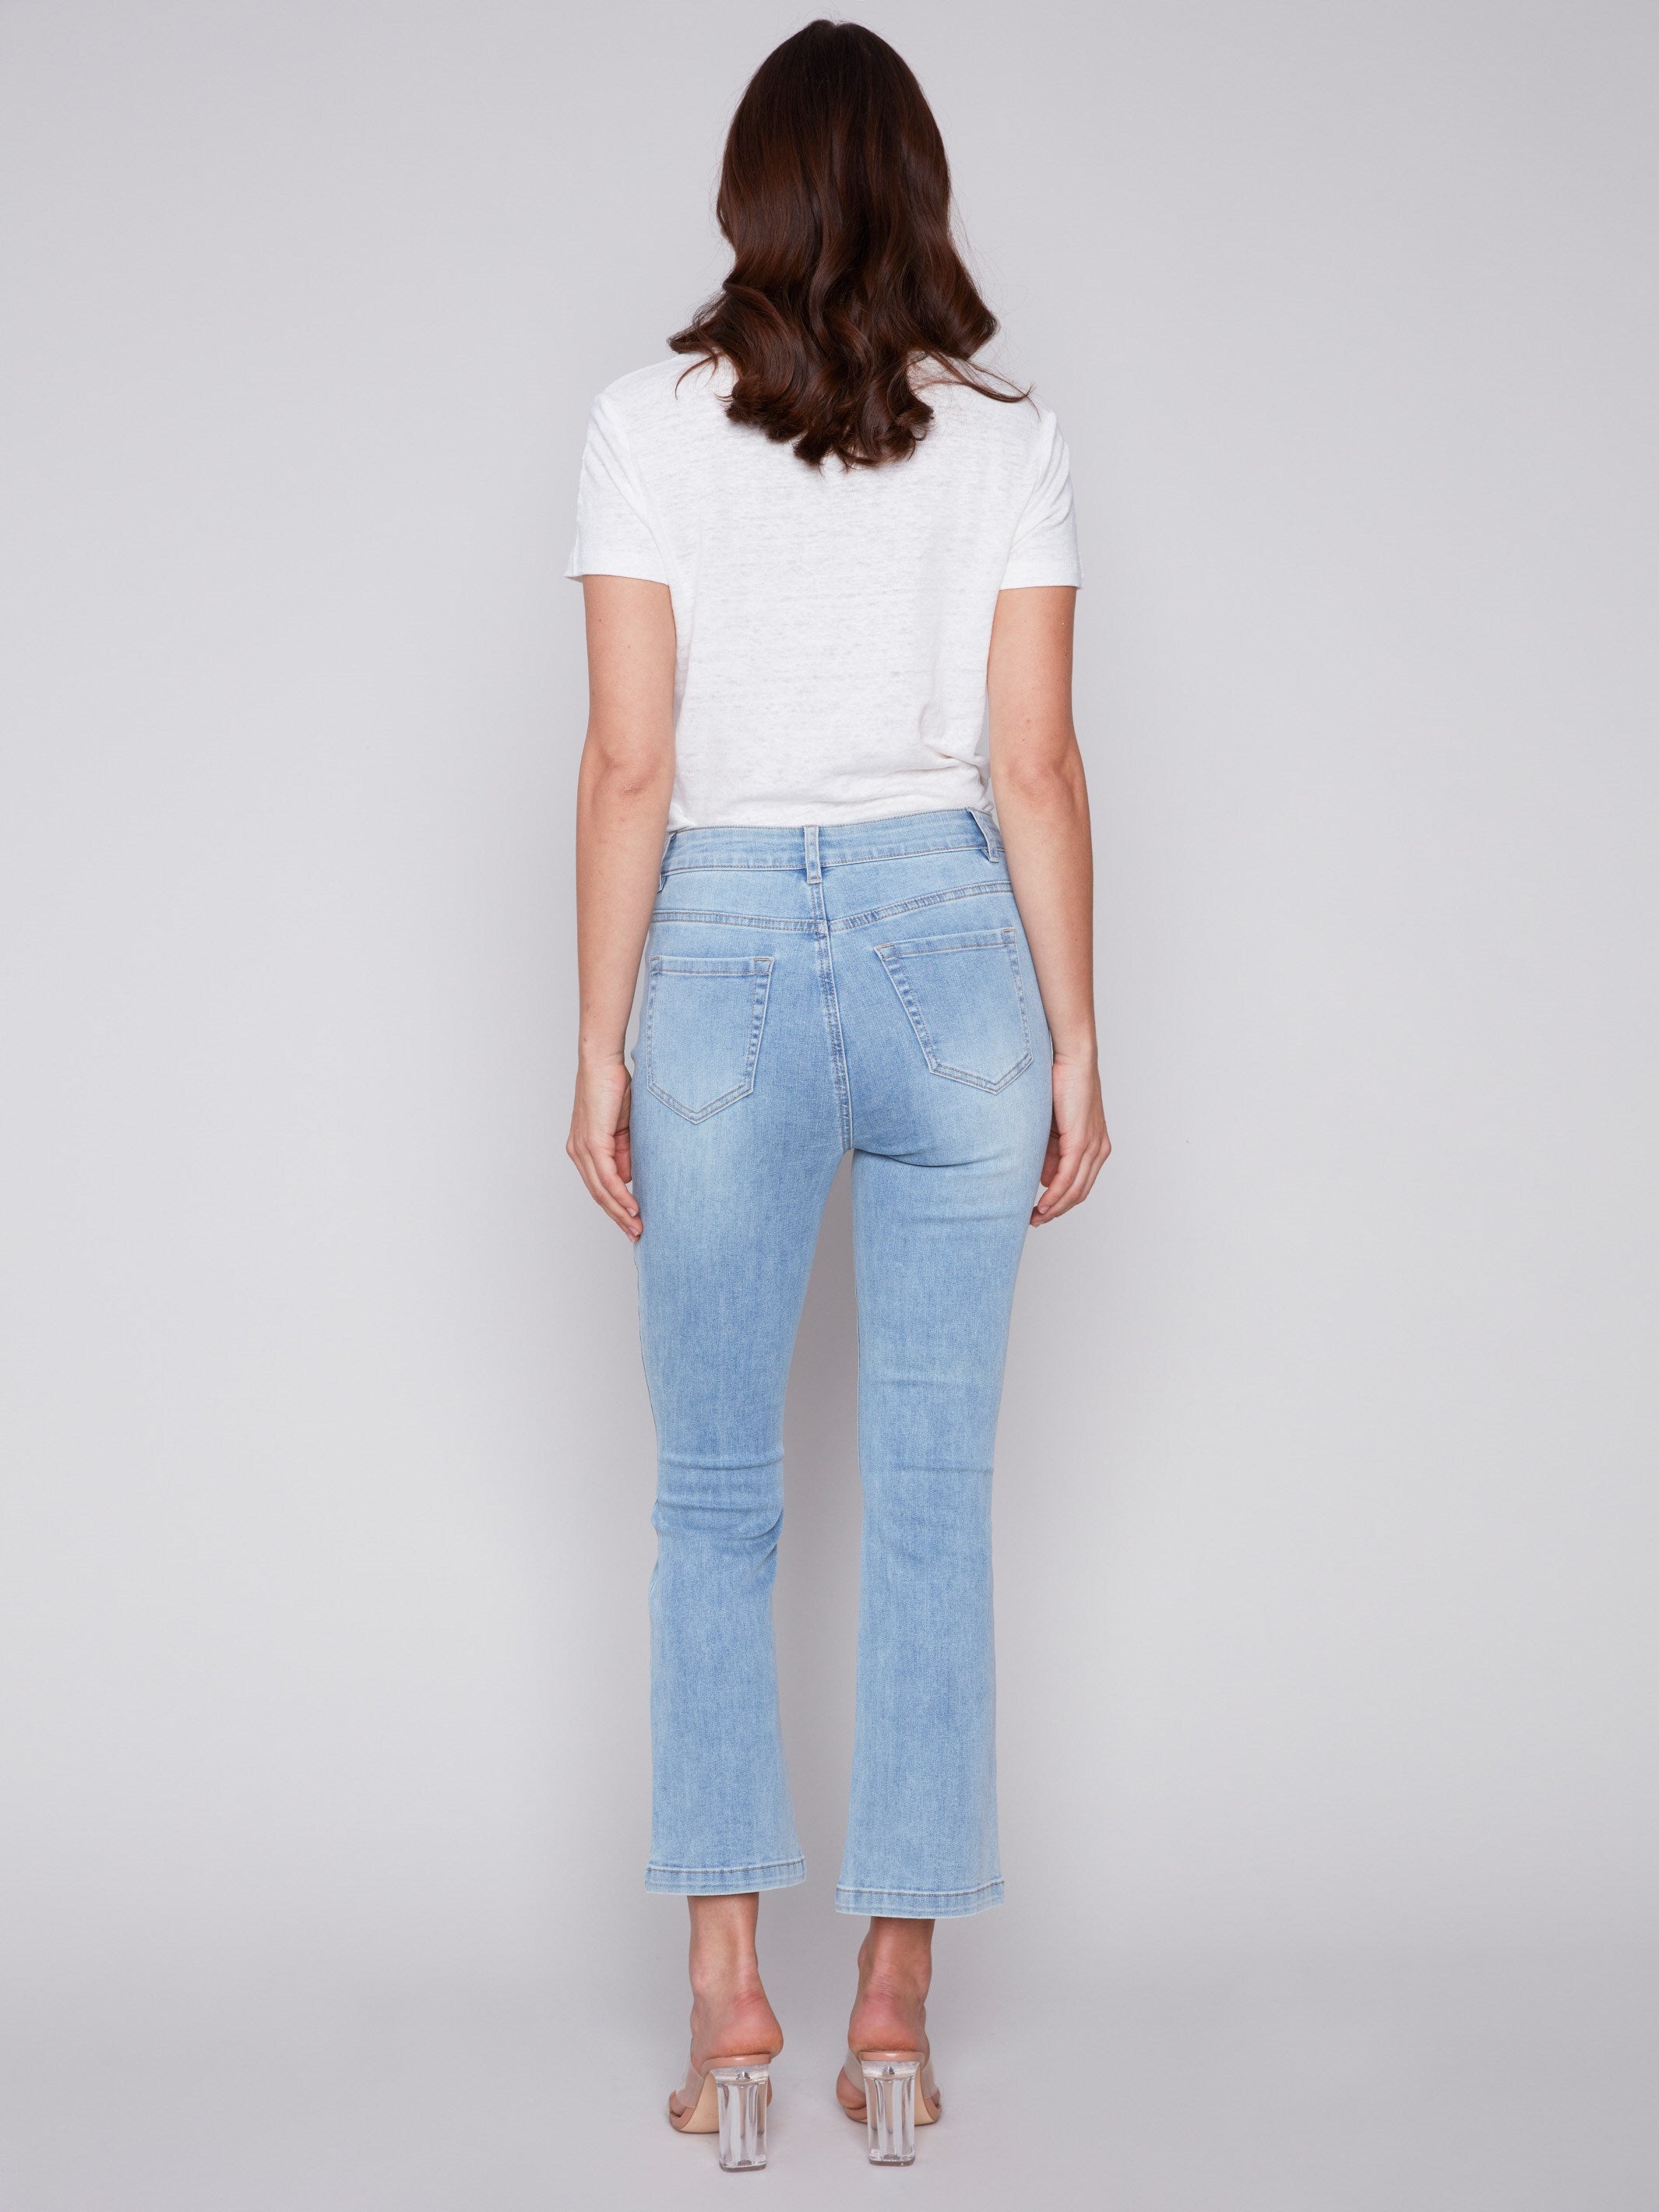 Bootcut Stretch Denim Pants - Light Blue - Charlie B Collection Canada - Image 5